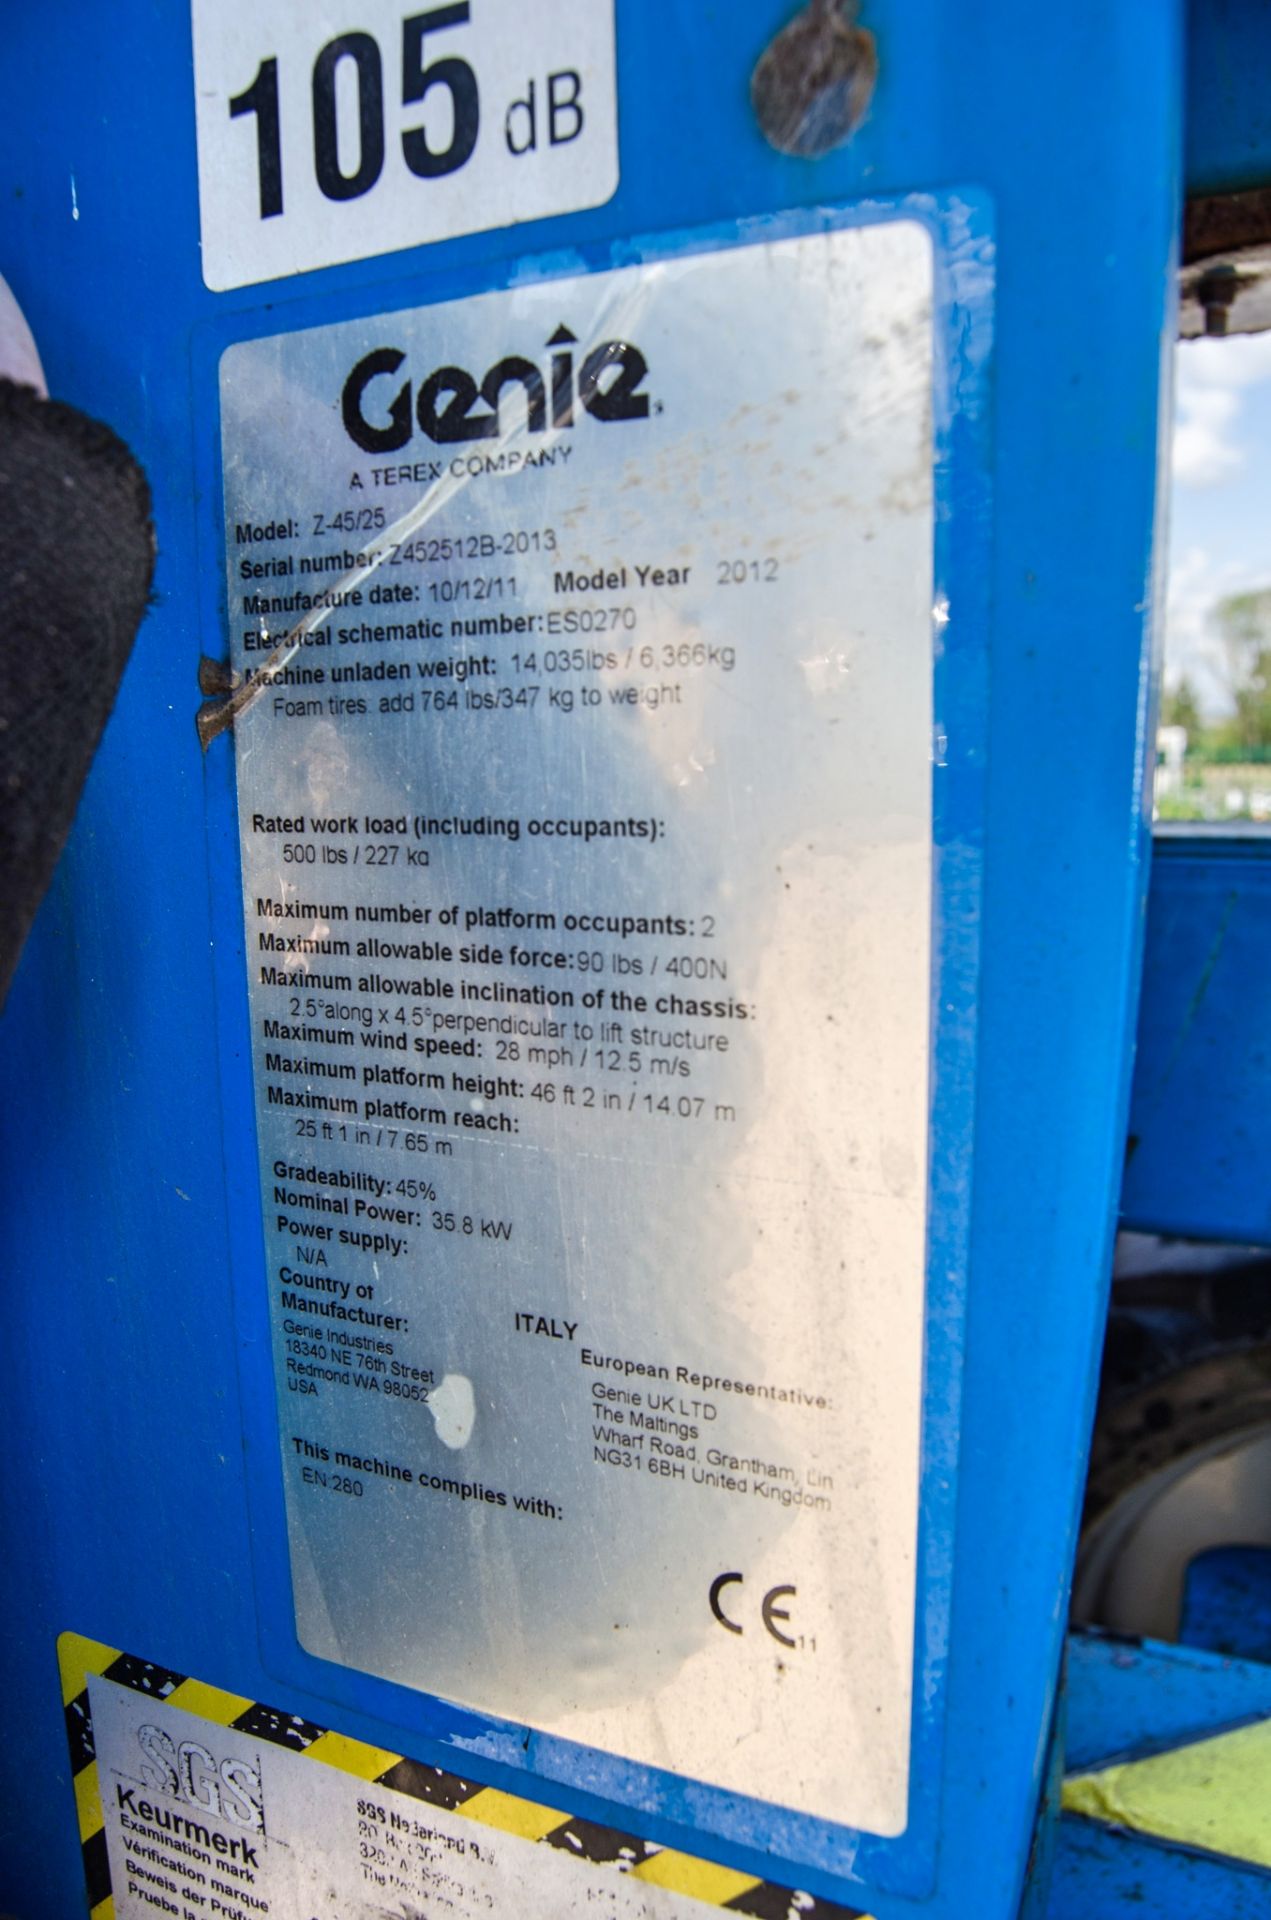 Genie Z-45/25 battery electric/diesel 4WD articulated boom lift Year: 2011 S/N: Z452512B-2013 - Image 18 of 18